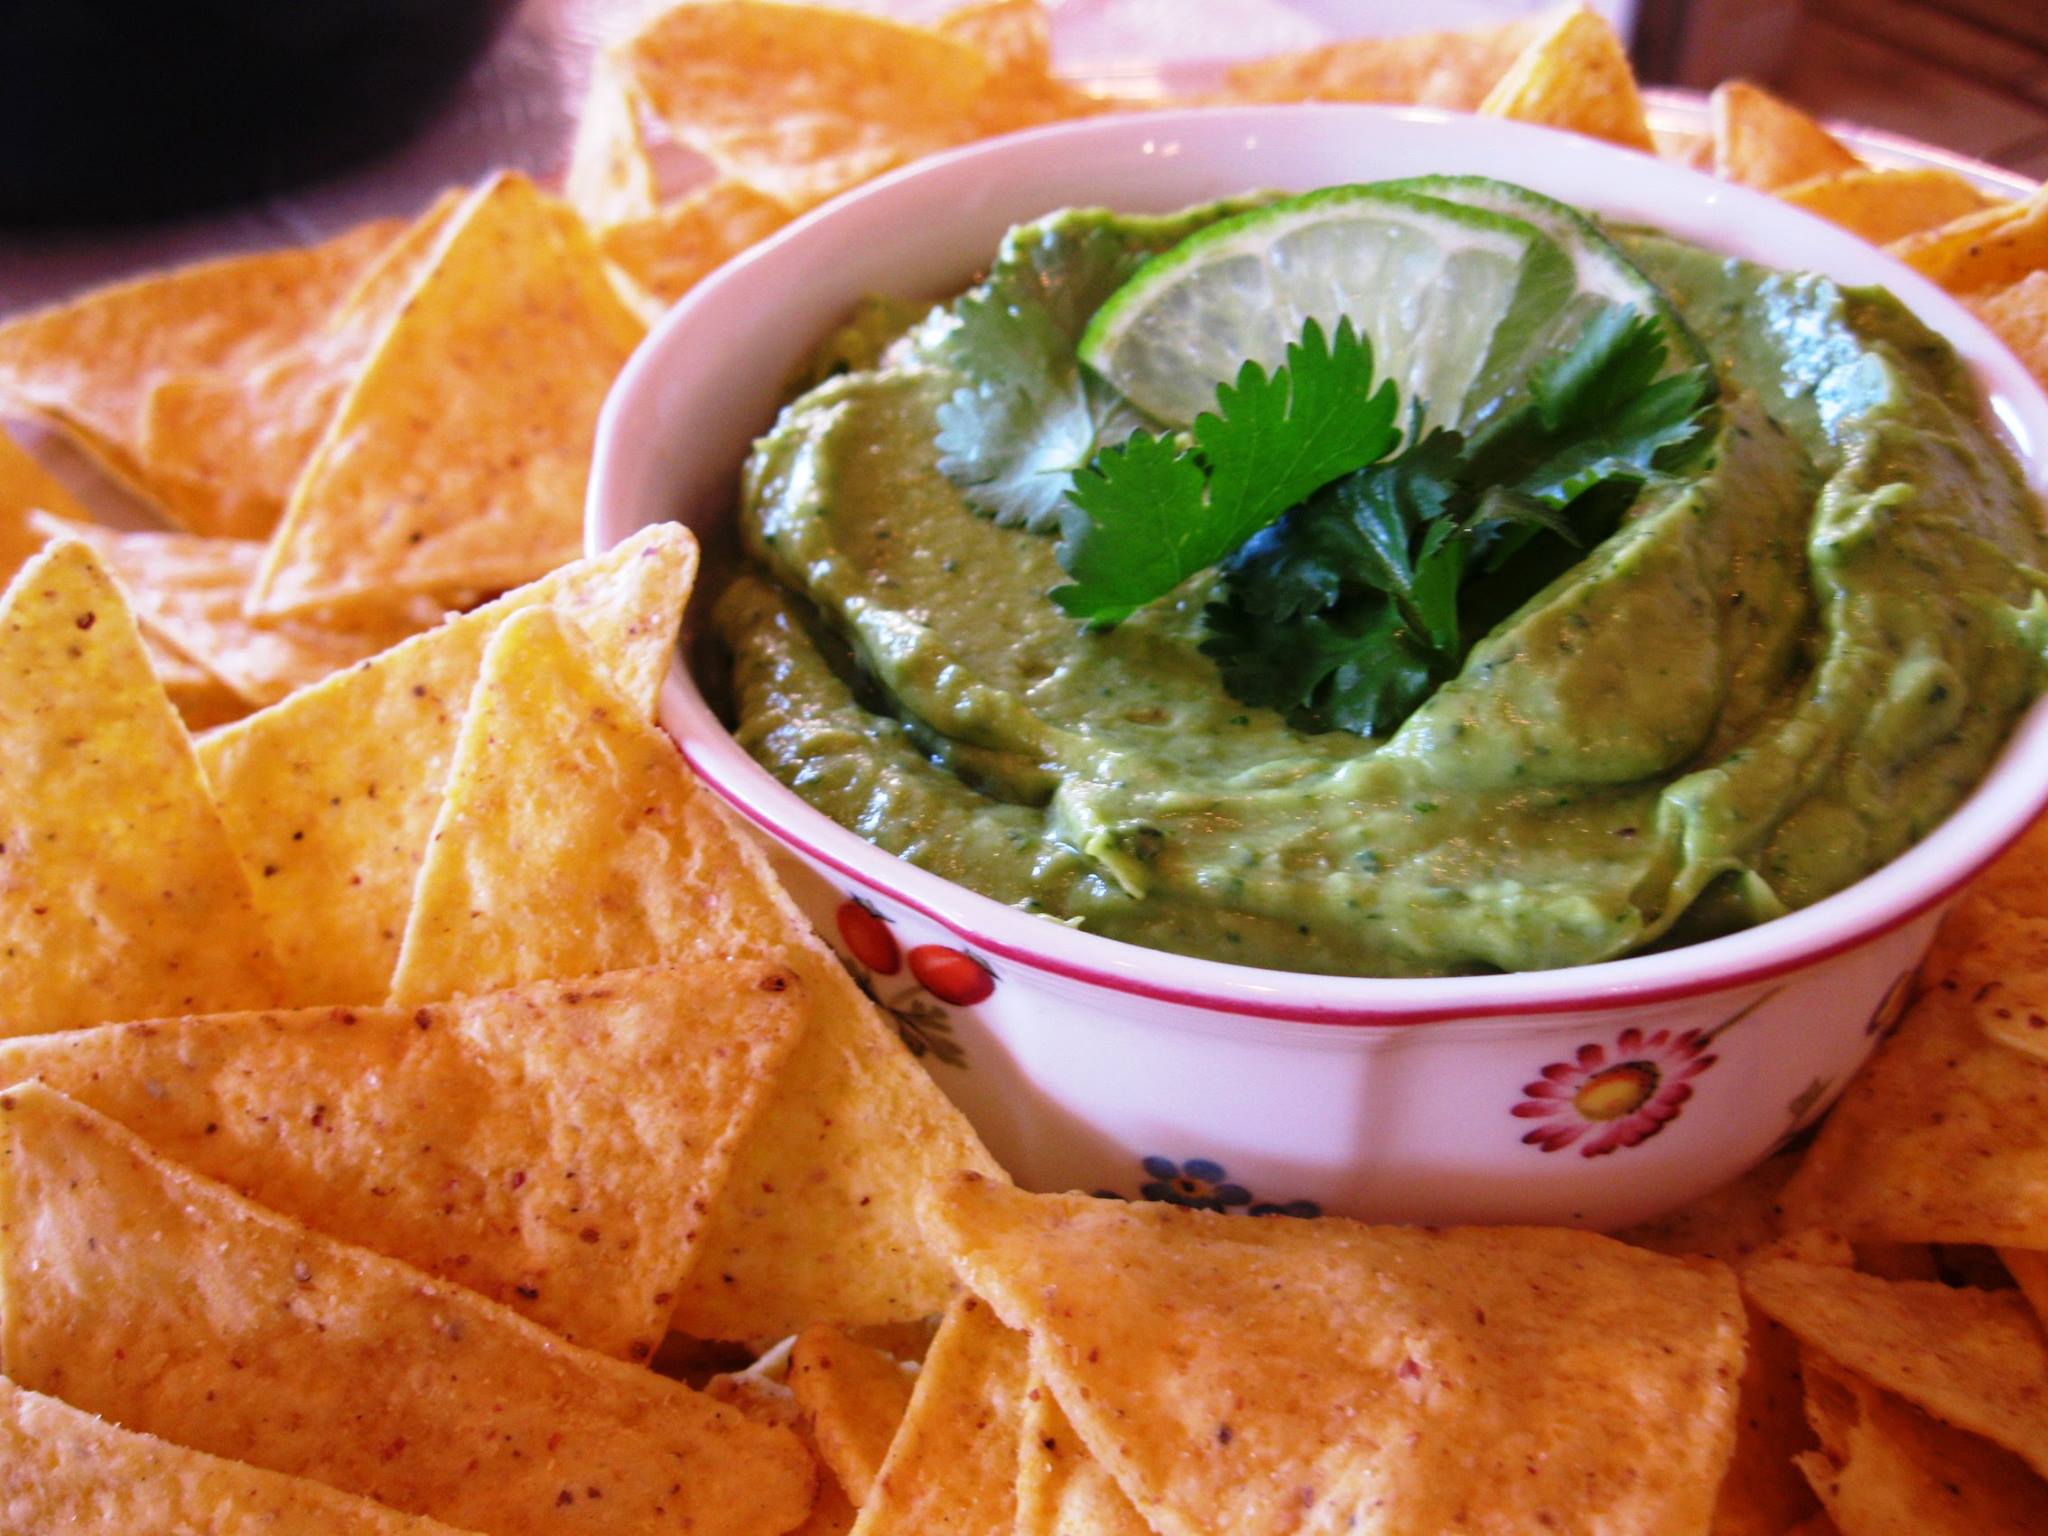 Coriander, spring onion and lime guacamole with corn tortilla chips